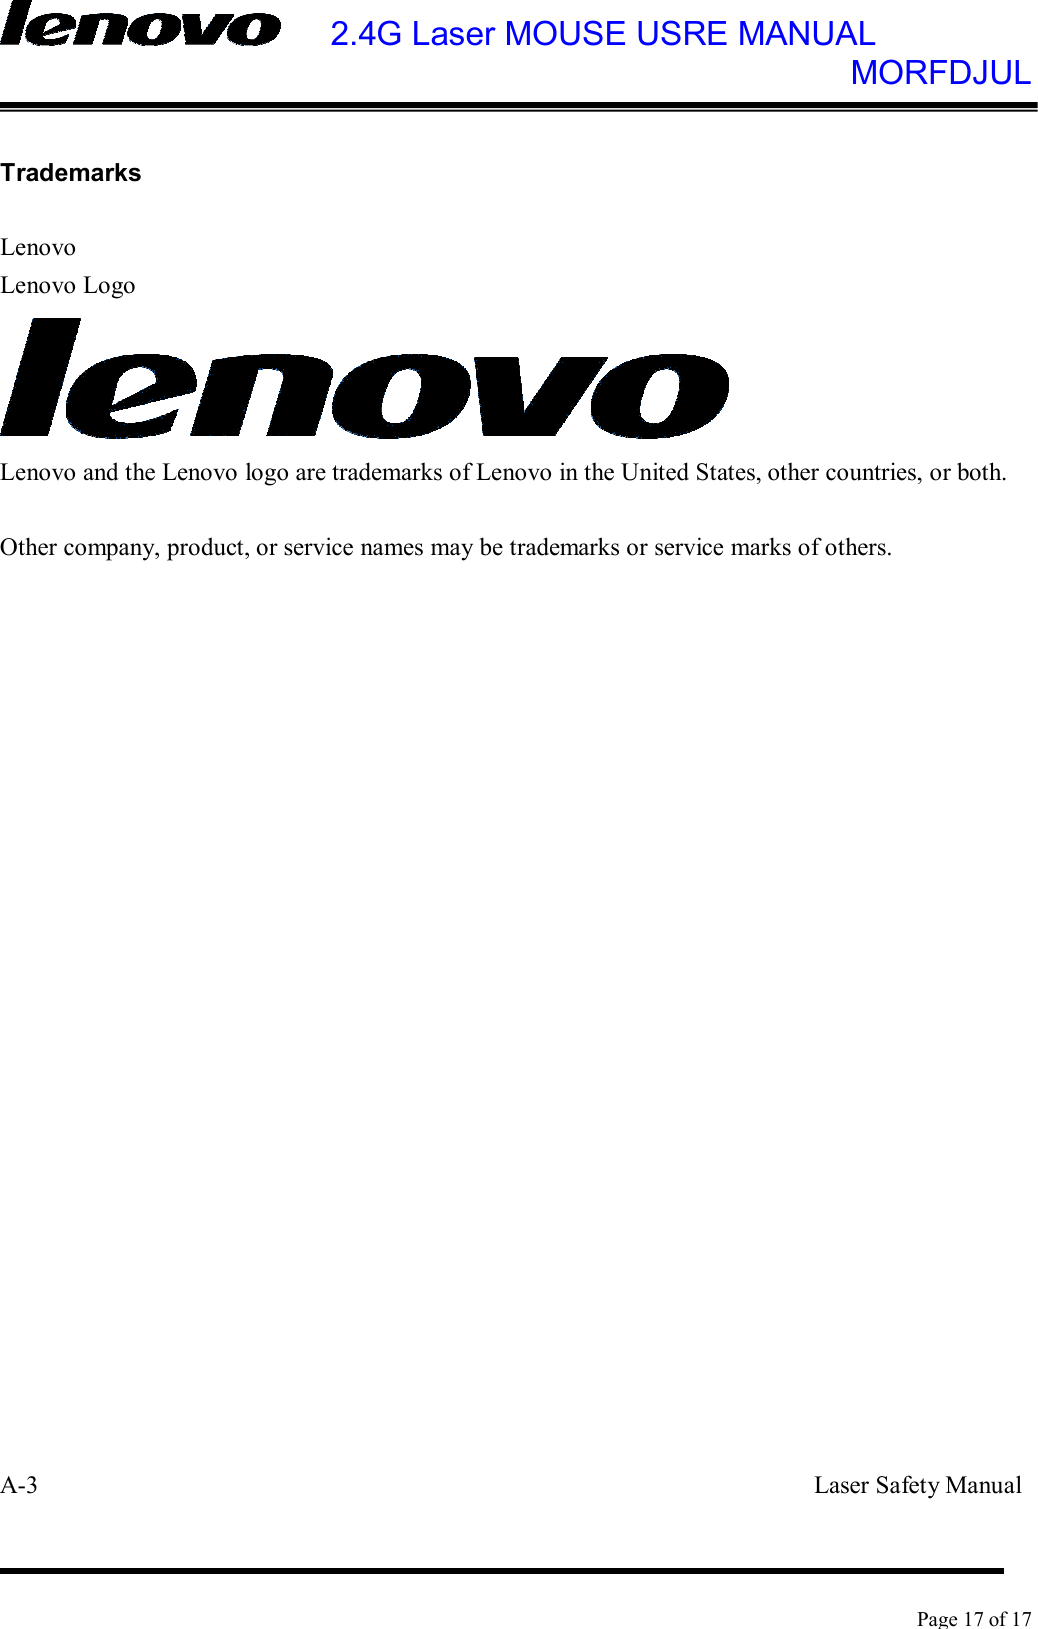    2.4G Laser MOUSE USRE MANUAL            MORFDJUL    Page 17 of 17   Trademarks  Lenovo Lenovo Logo  Lenovo and the Lenovo logo are trademarks of Lenovo in the United States, other countries, or both.  Other company, product, or service names may be trademarks or service marks of others.                         A-3                                                              Laser Safety Manual 